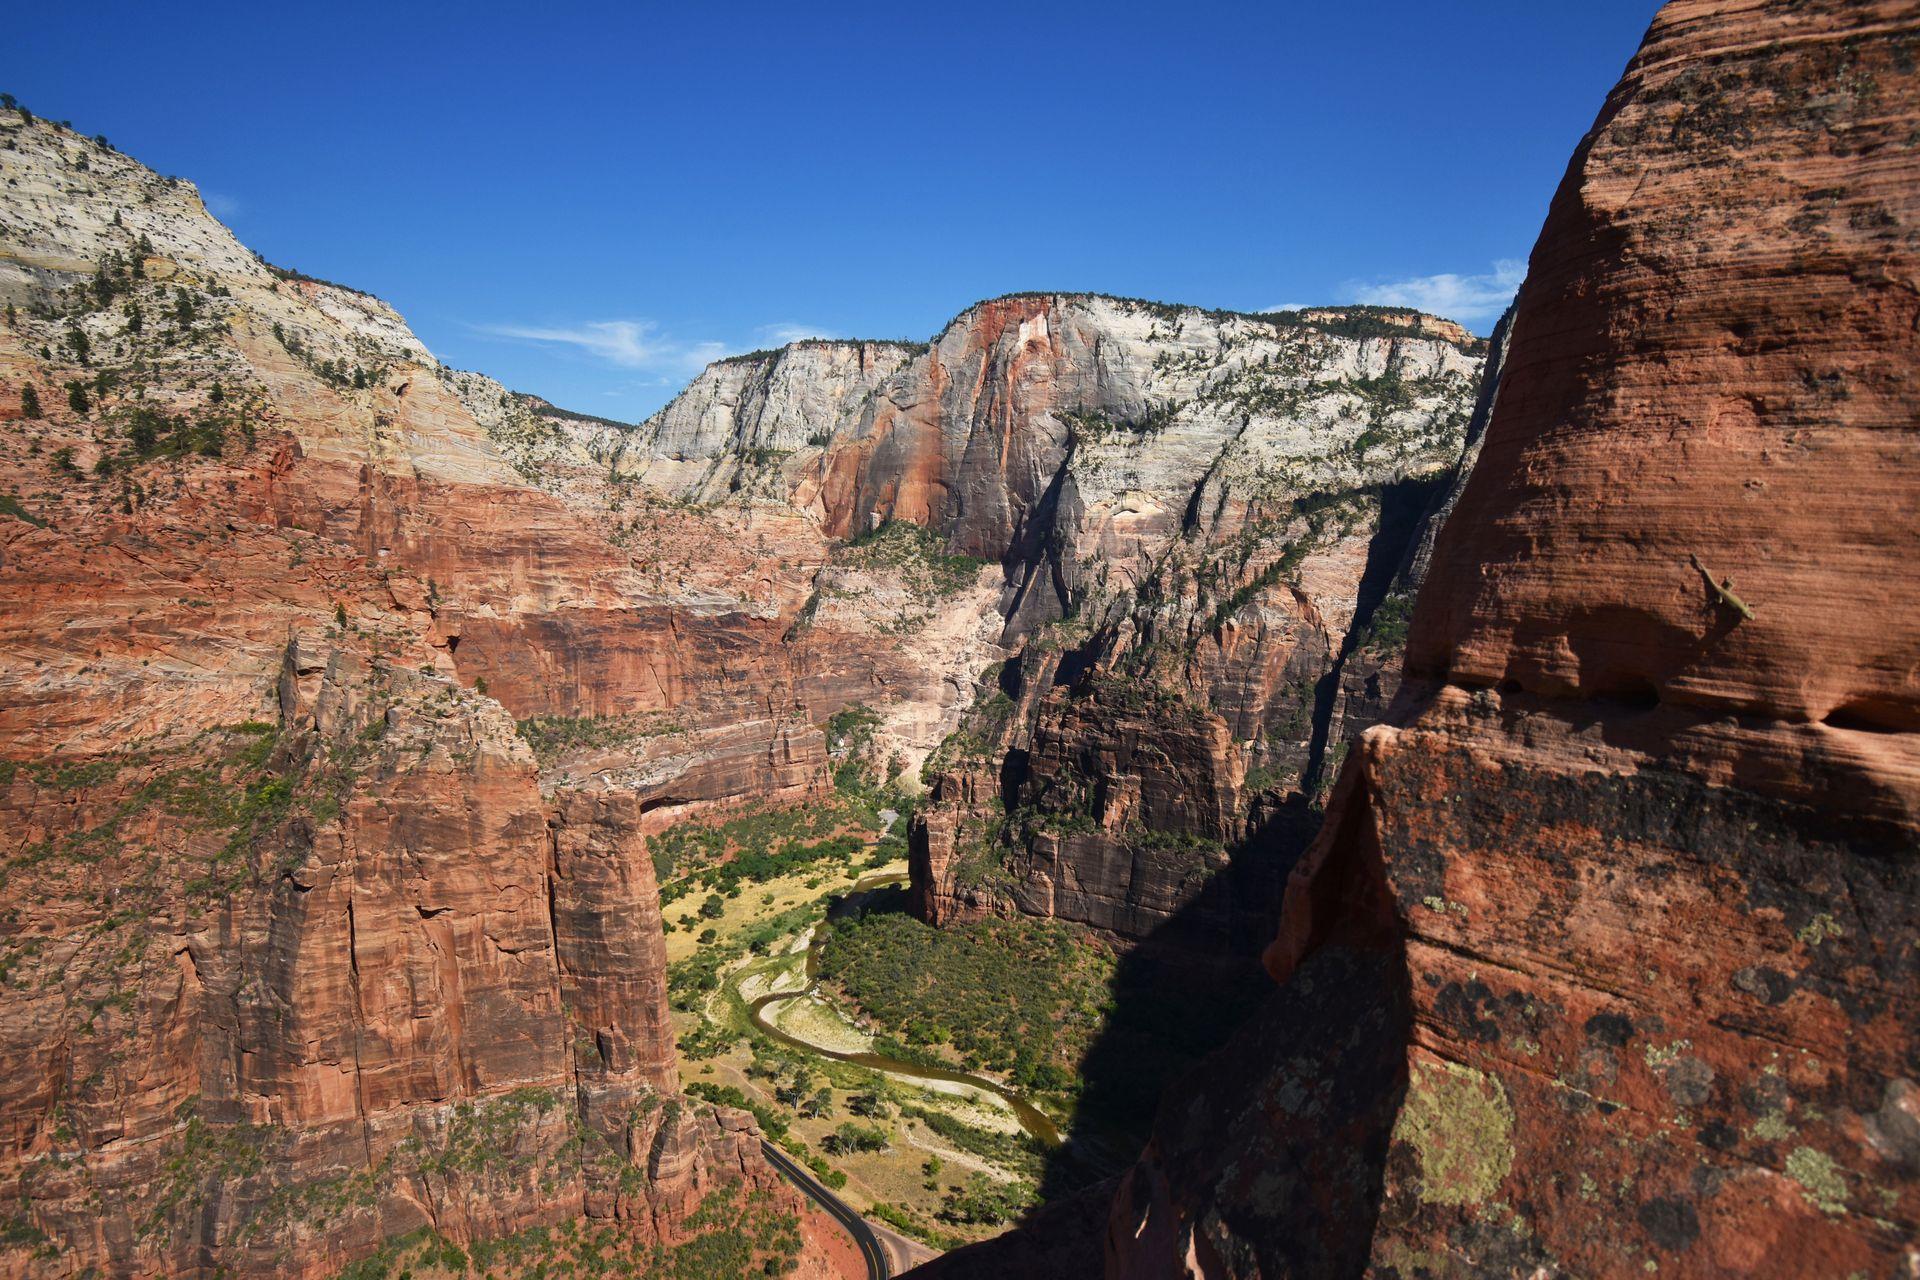 A view of a canyon in Zion National Park. The canyon walls are orange and white and tower high above the valley.